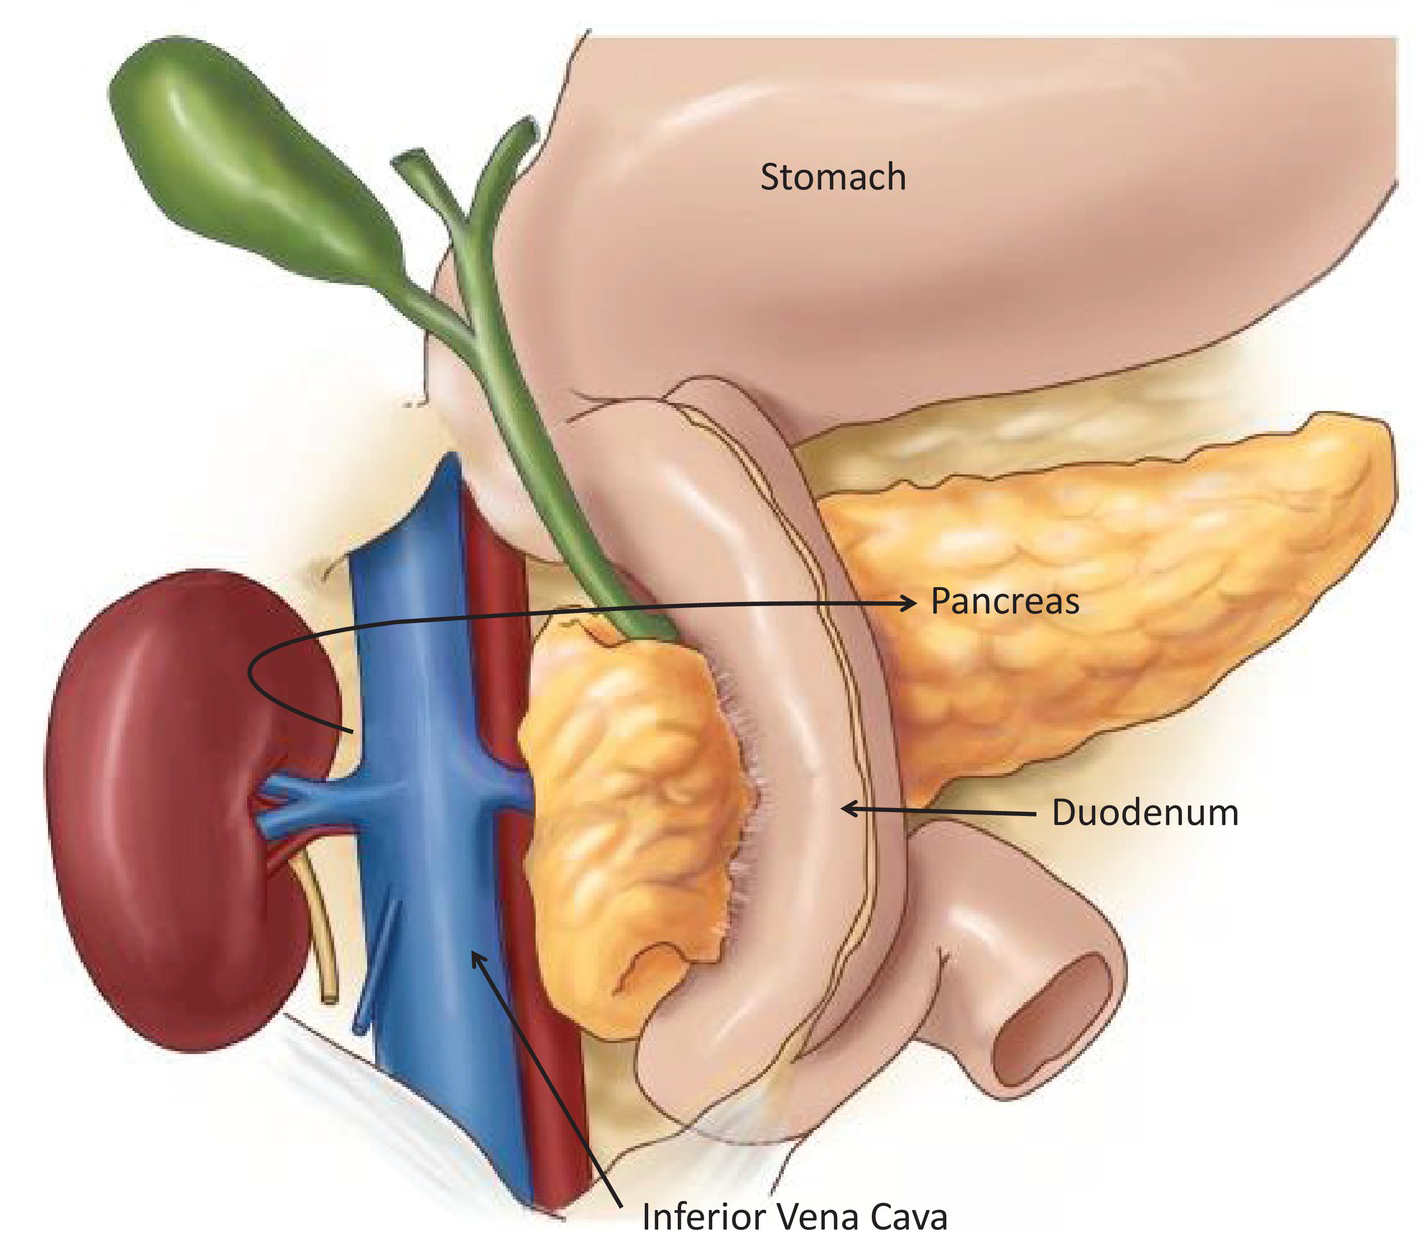 Duodenum- Anatomy, Functions and Conditions